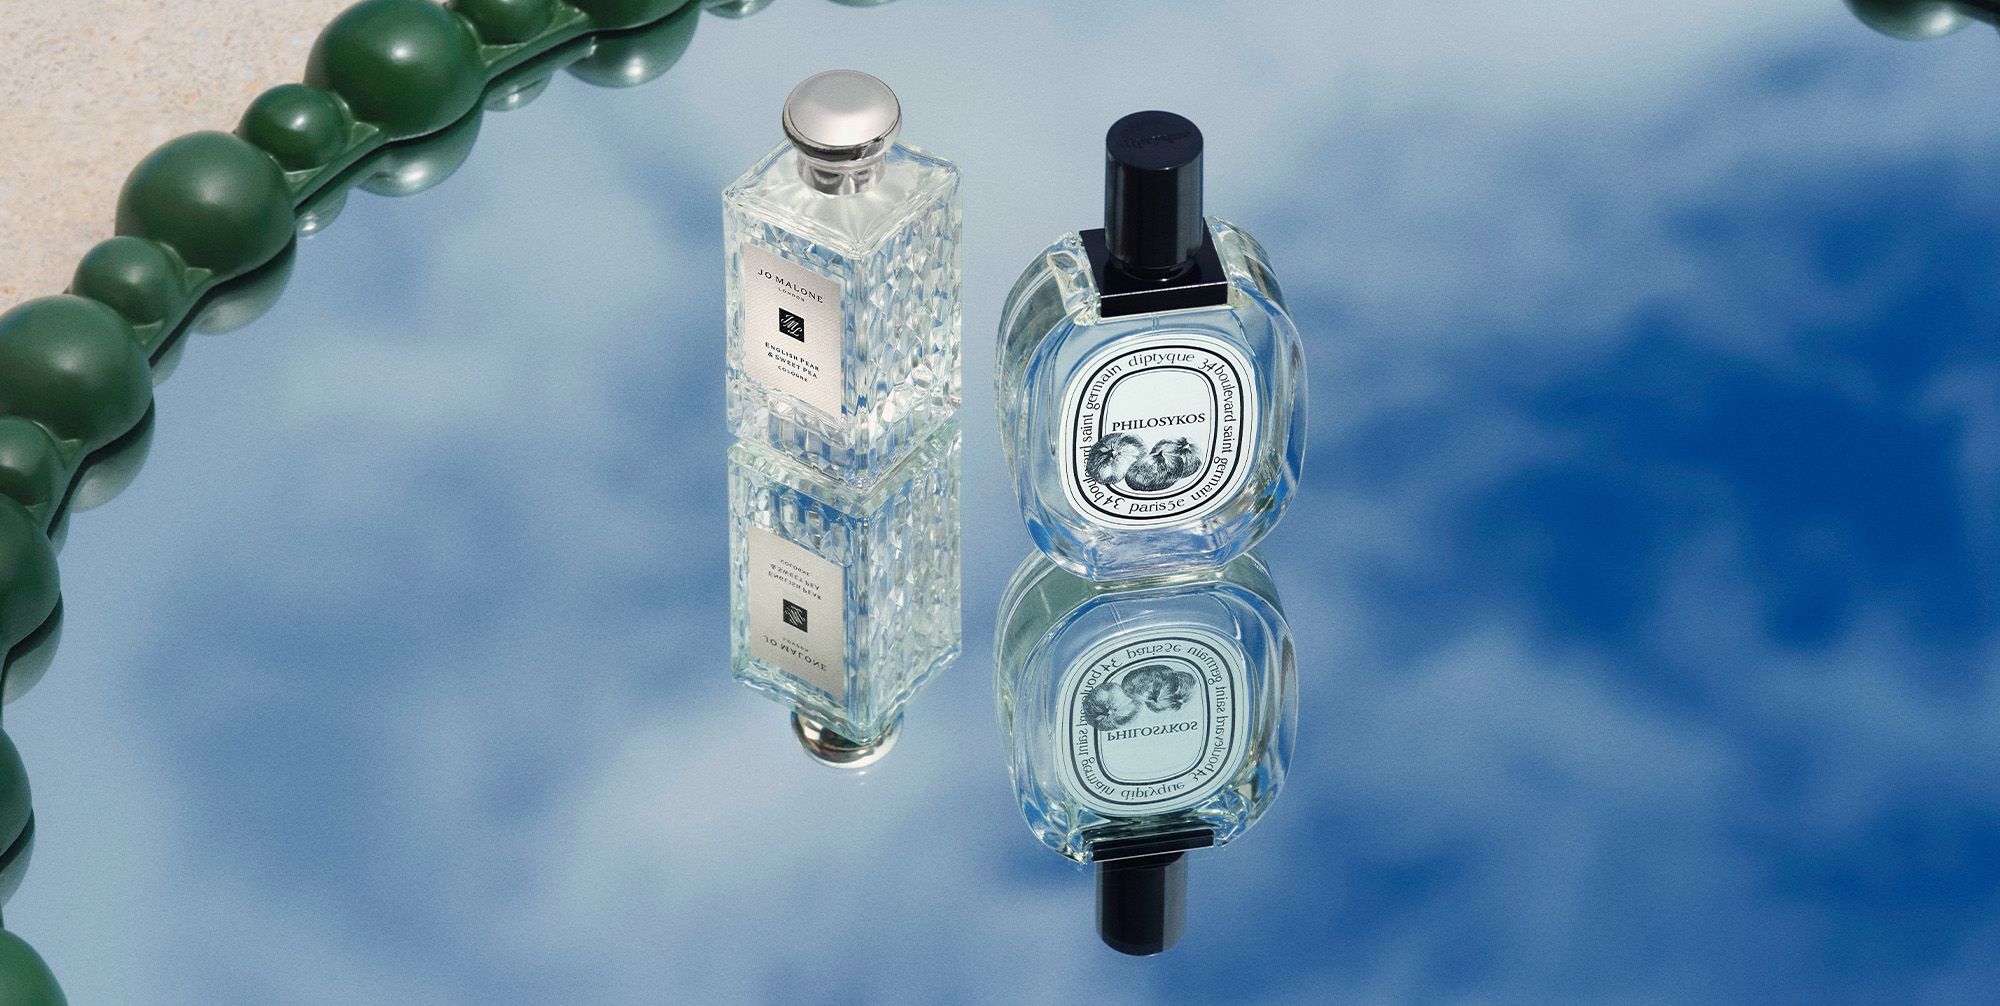 Bottles of frangrances sitting on a mirror reflecting a blue sky